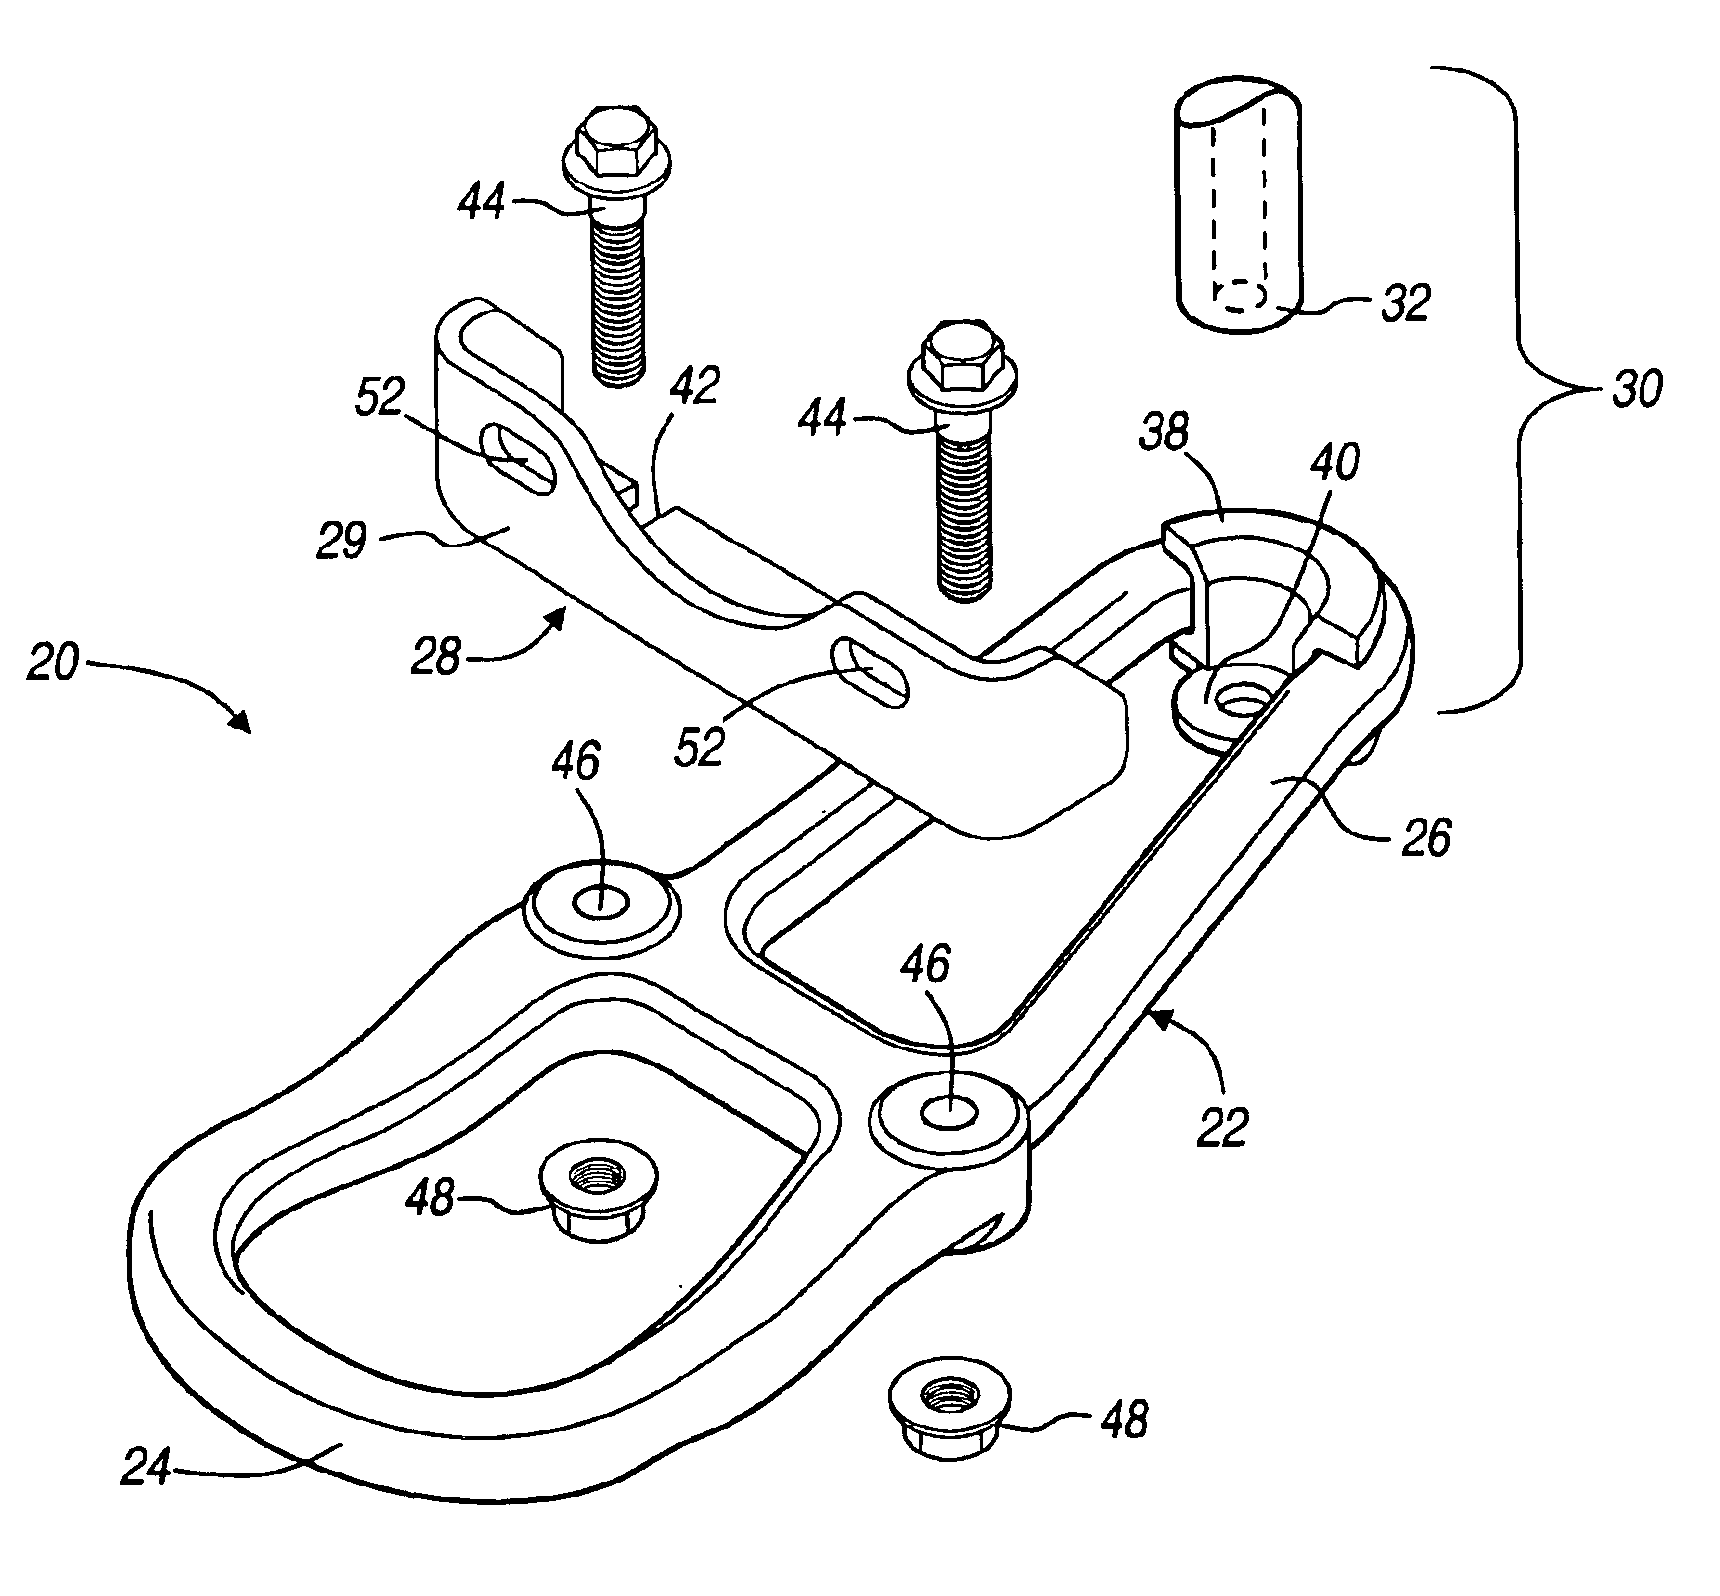 Detachable tow hook assembly